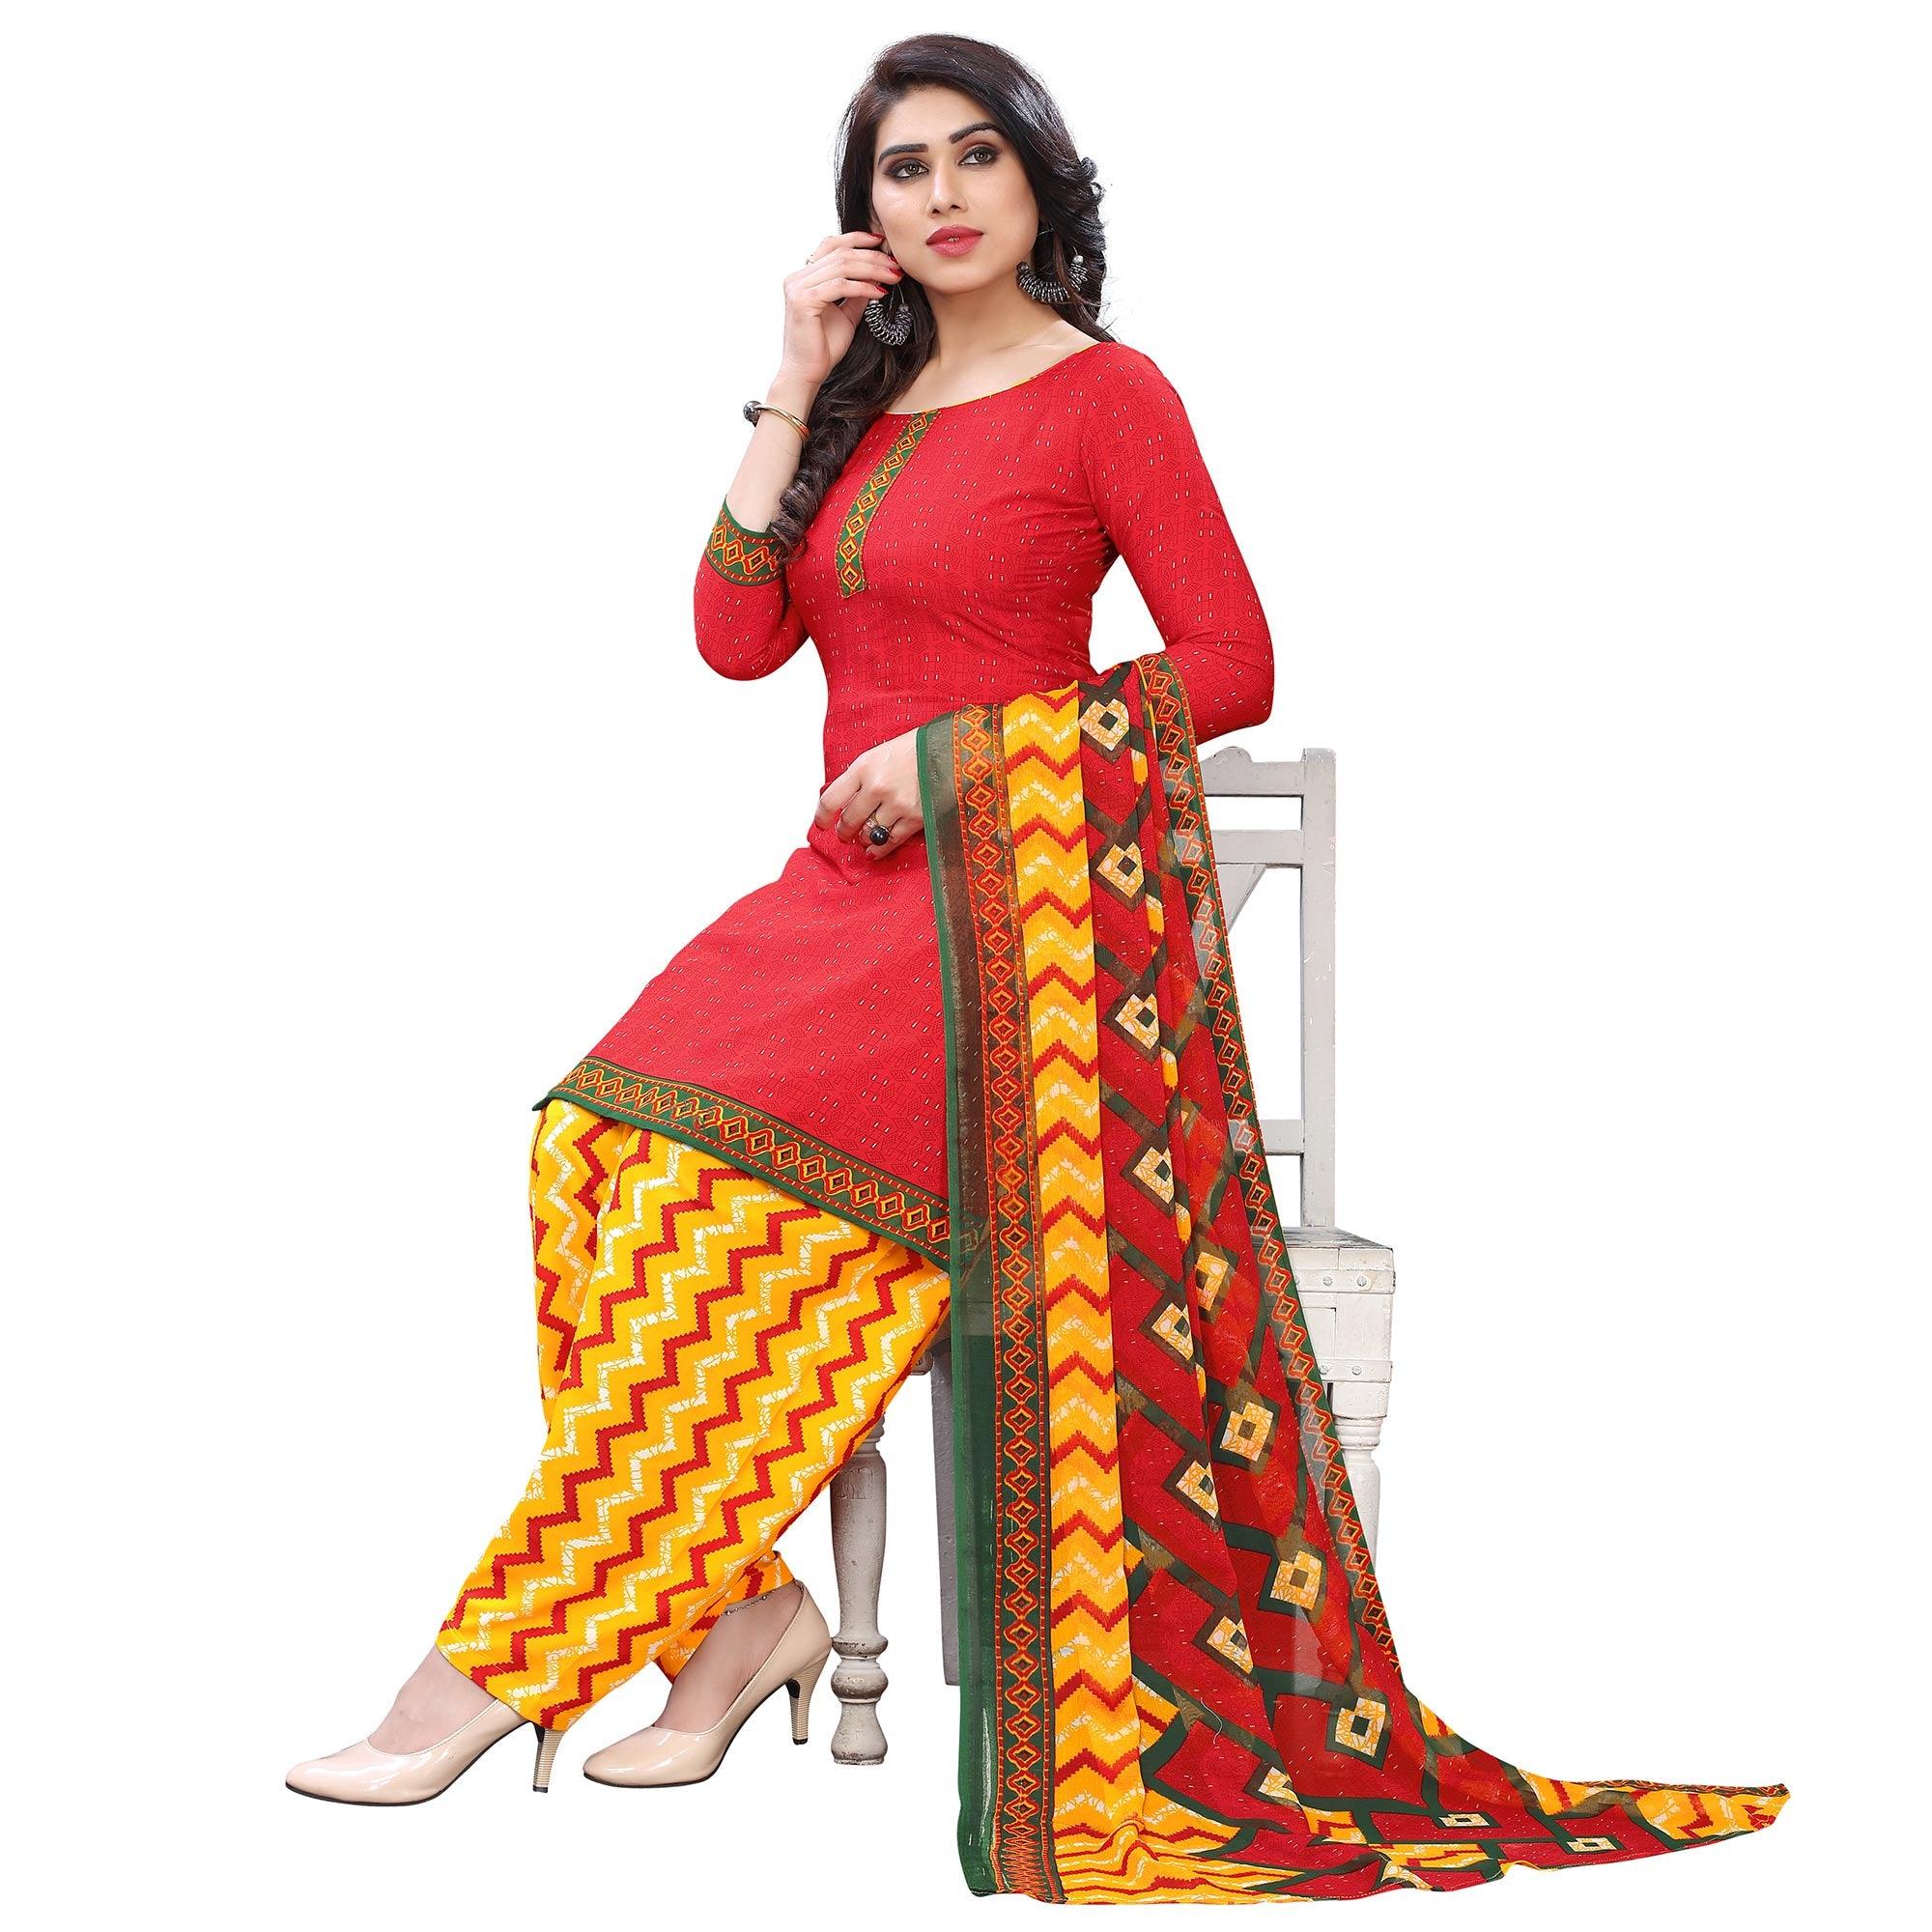 Energetic Peach Colored Casual Wear Printed French Crepe Patiala Dress Material - Peachmode